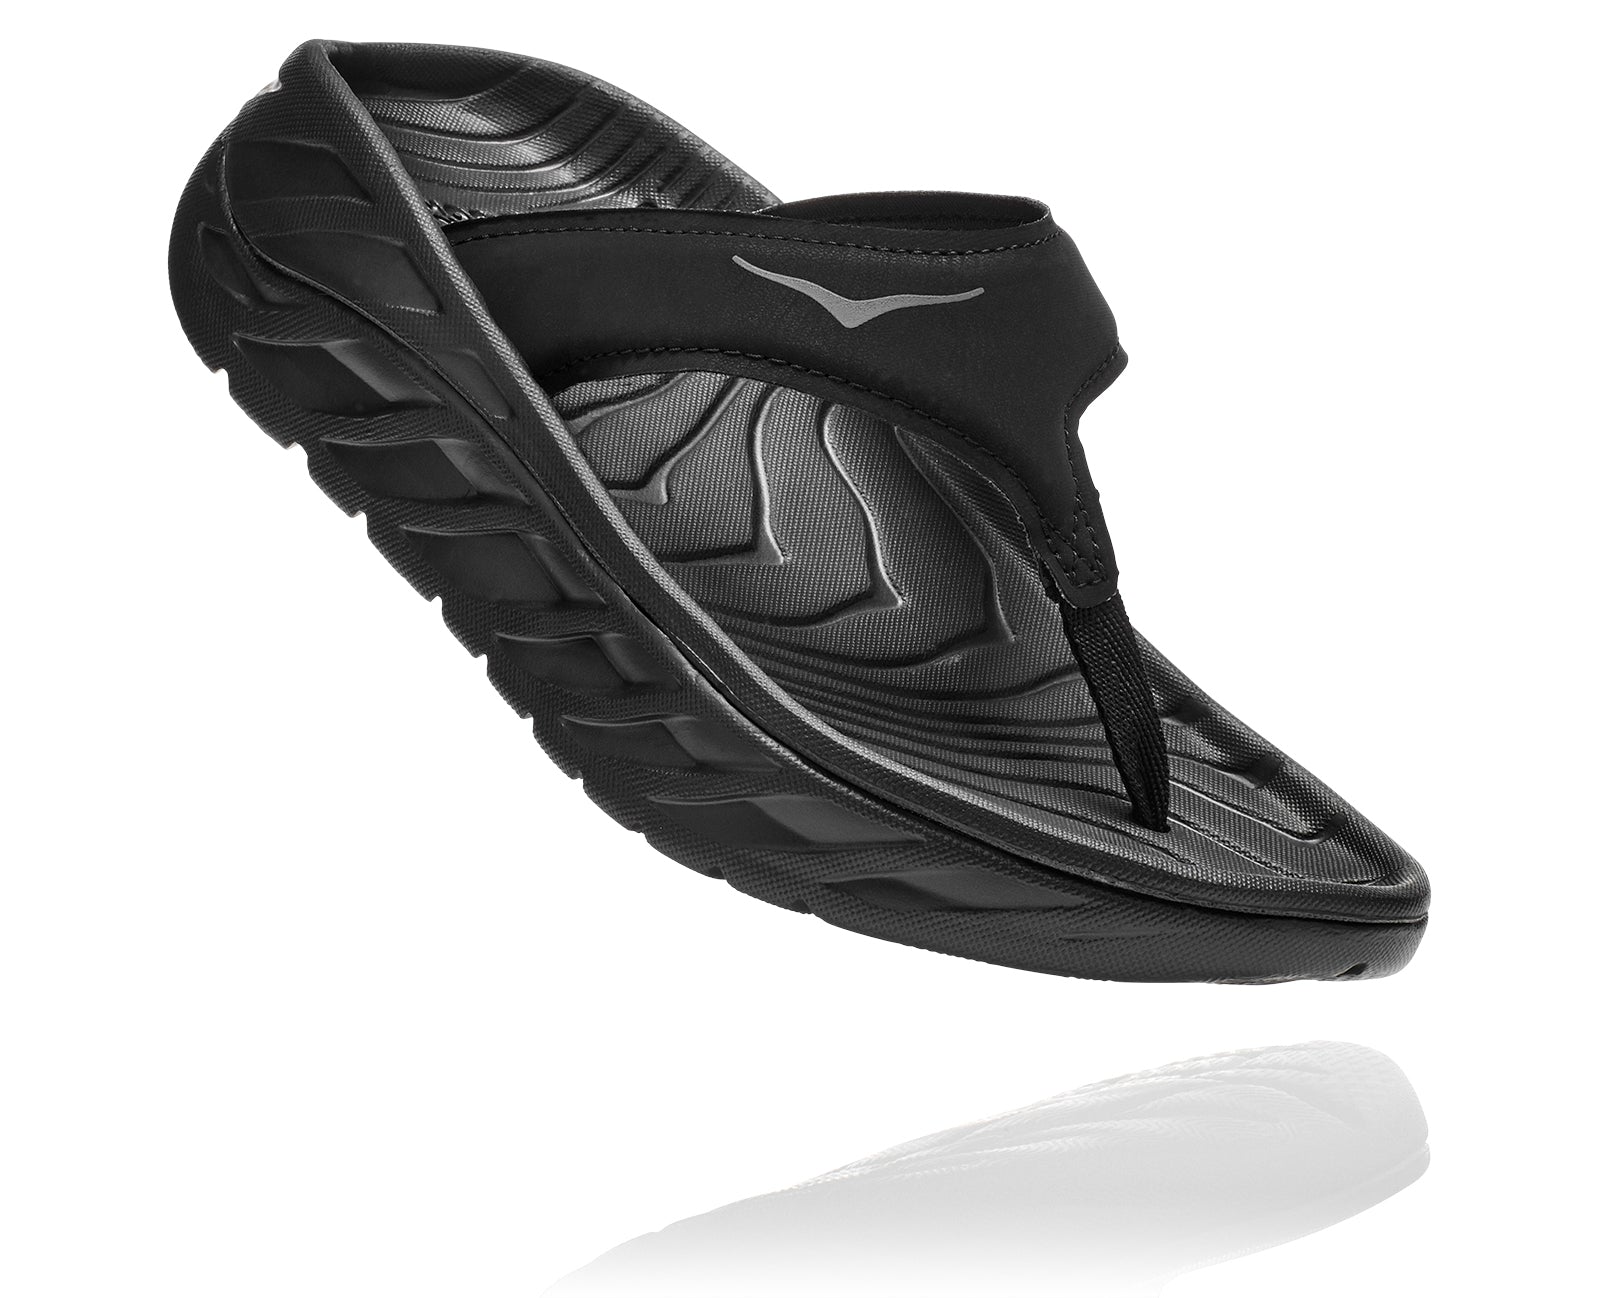 You just gave it all in that race and now your feet need some care, pronto. Enter the Women's ORA Recovery Flip. It features Hoka One One's oversized midsole and Meta-Rocker into a flip flop and improved the toe straps with a more anatomically friendly fit. It hugs the foot and provides sleek comfort and support. Your tired feet just got rescued. You’re welcome.